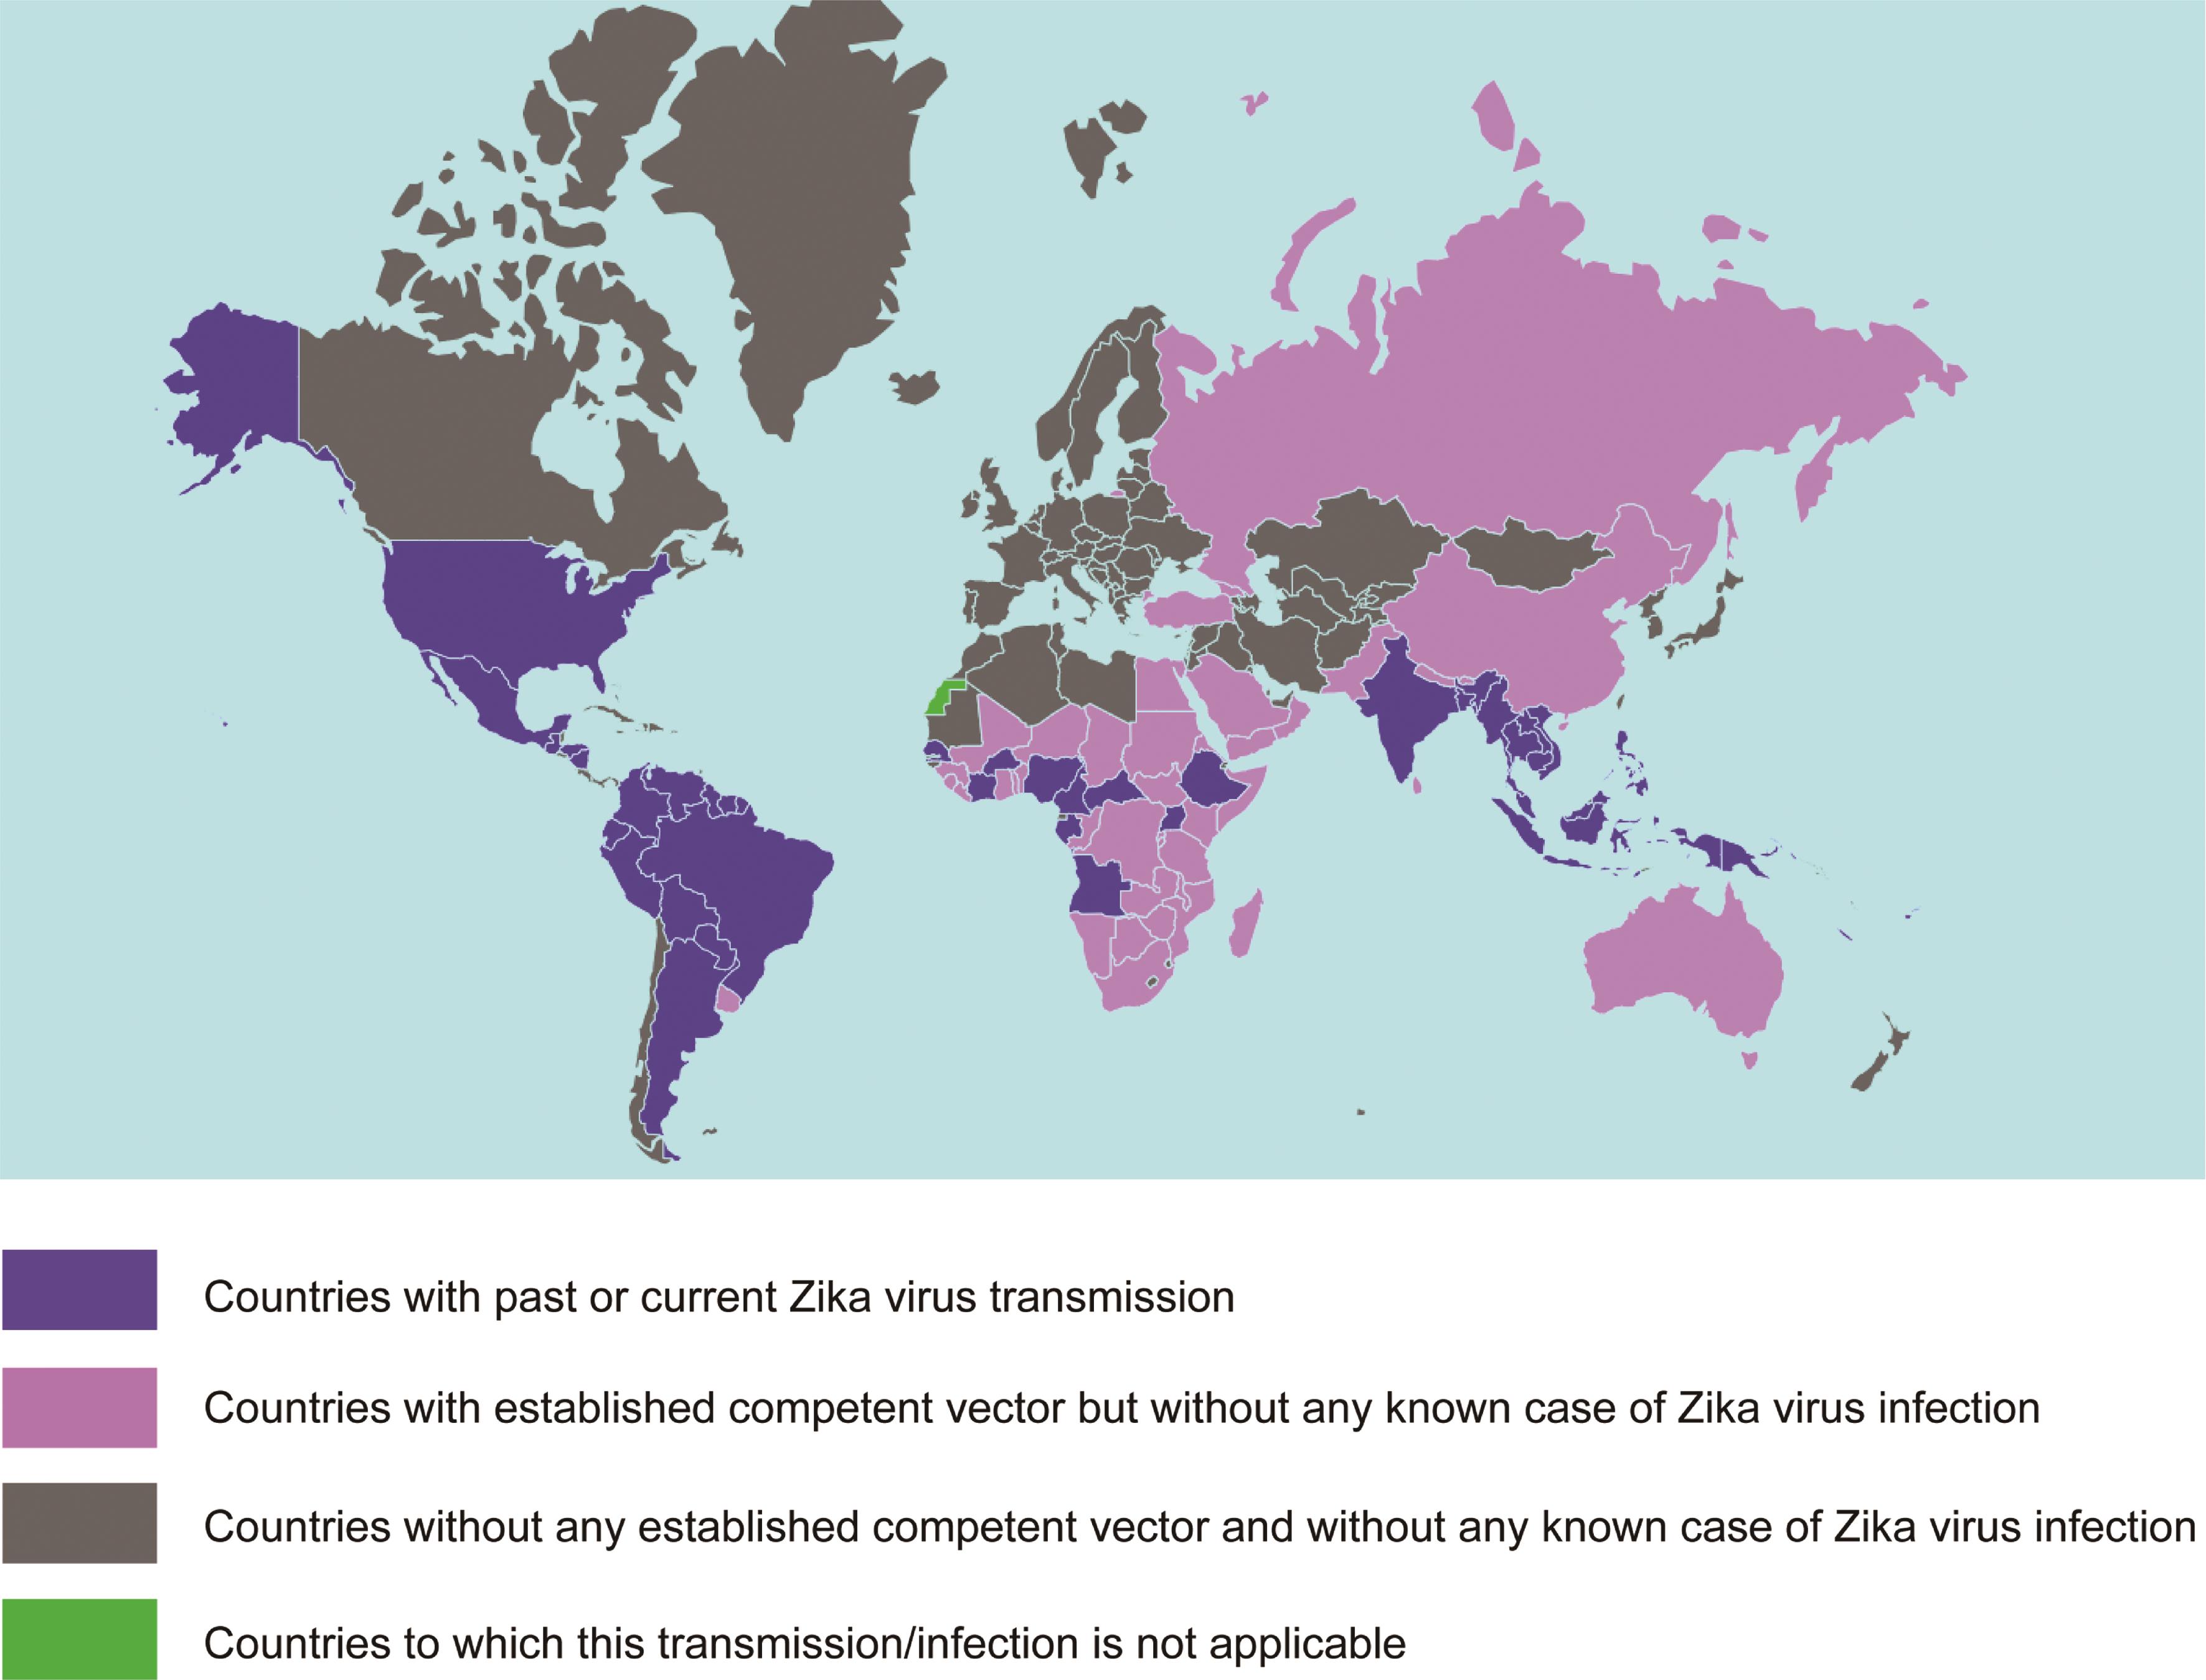 Geographical distribution of Zika virus spread.